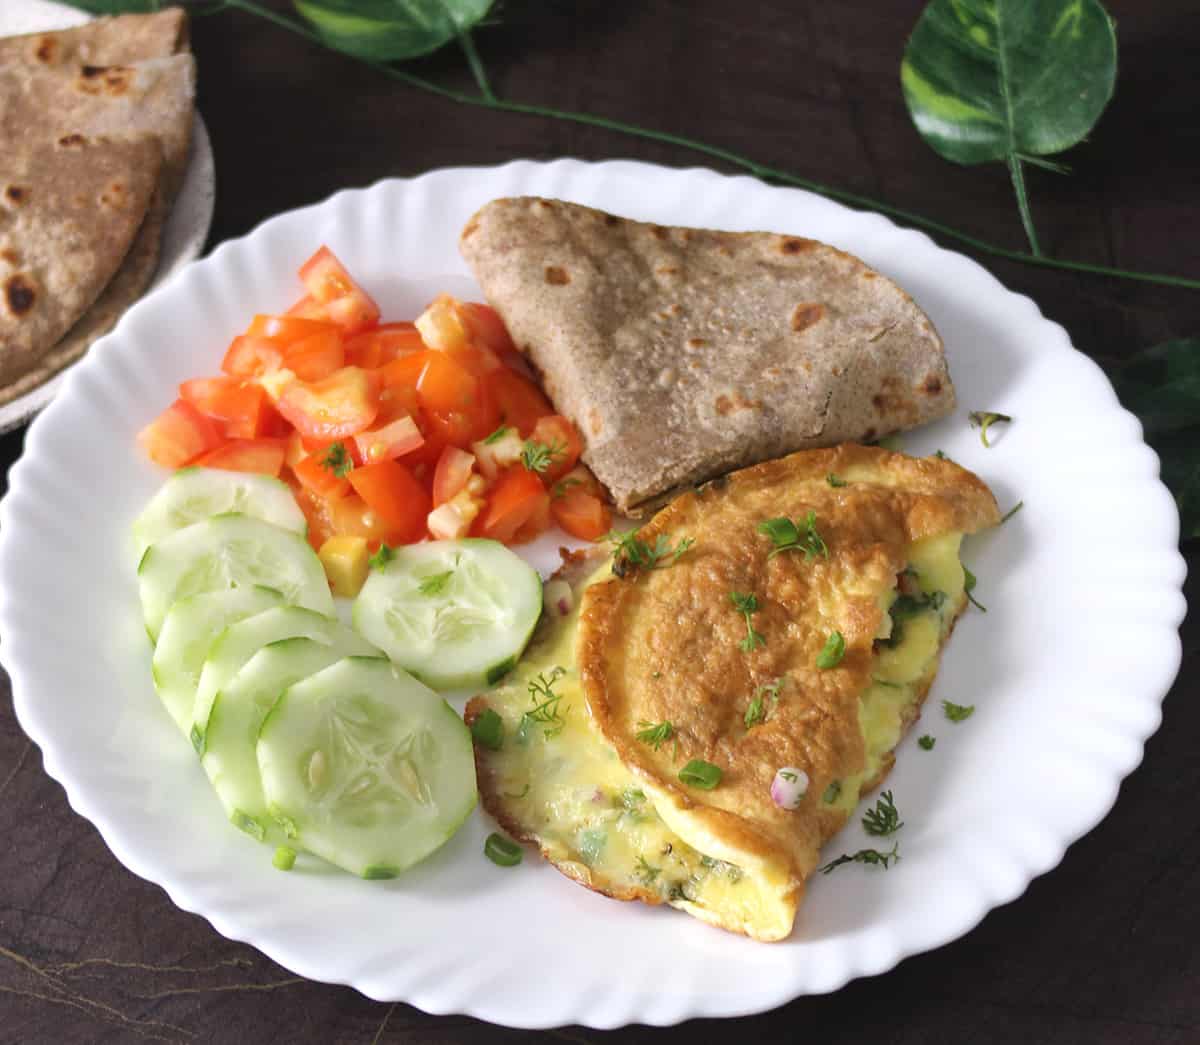 healthy meal for weight loss and diabetes (multigrain roti, omelette, cucumber, tomato)